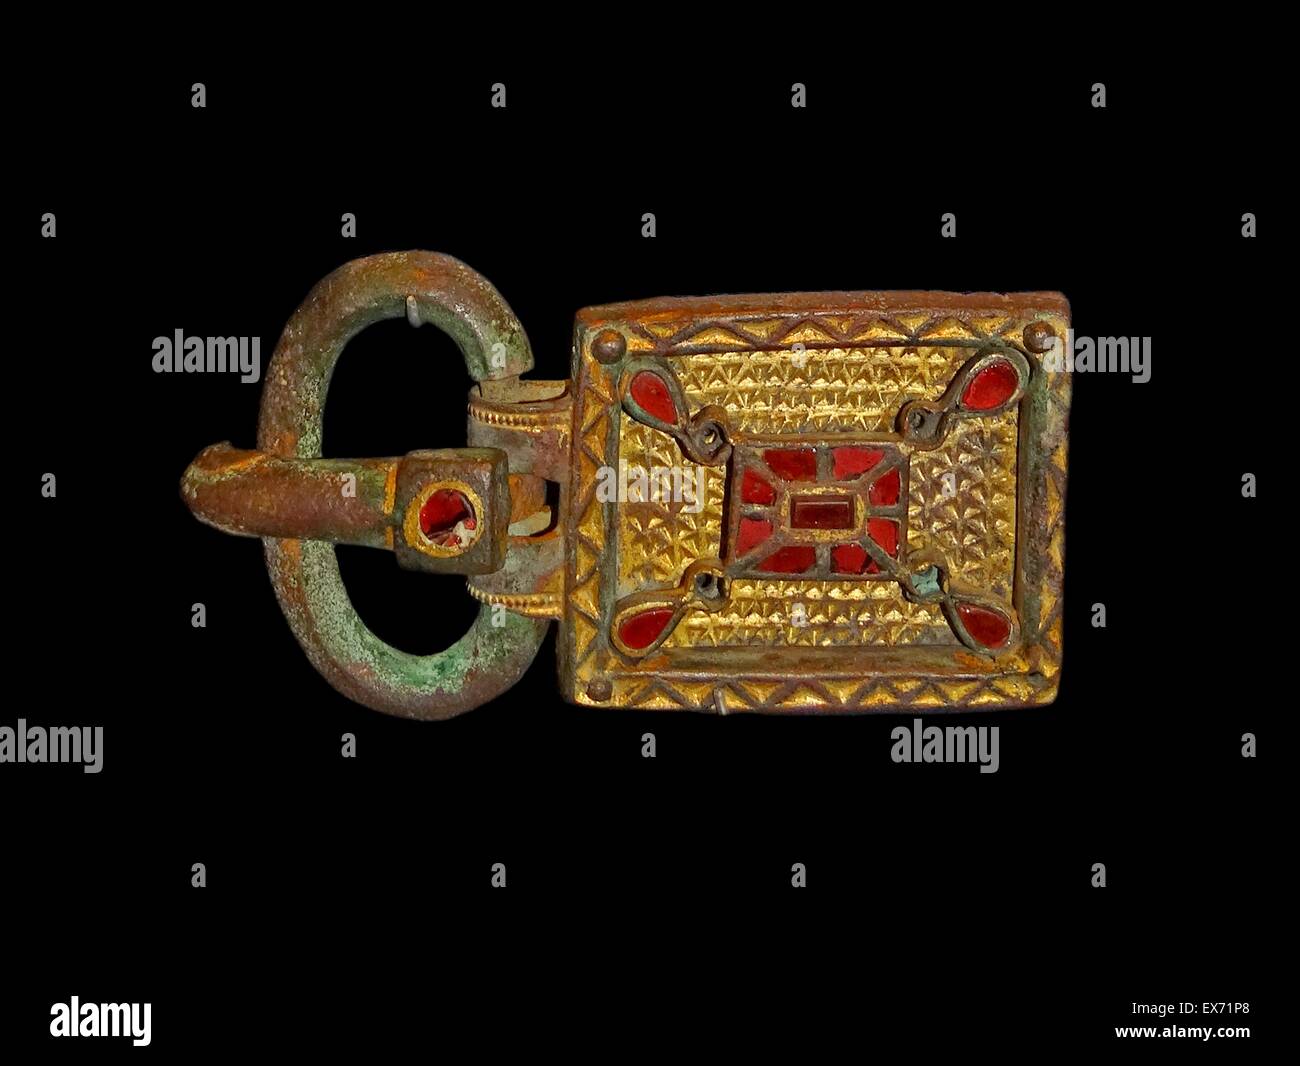 Gothic style buckle with rectangular plate deriving from Roman forms. The decoration reveals regional Gothic fashion. The gilded silver buckle with an eagle's head is typical of the northern Black Sea area which was settled by Crimean Goths. AD 400- 660; Stock Photo